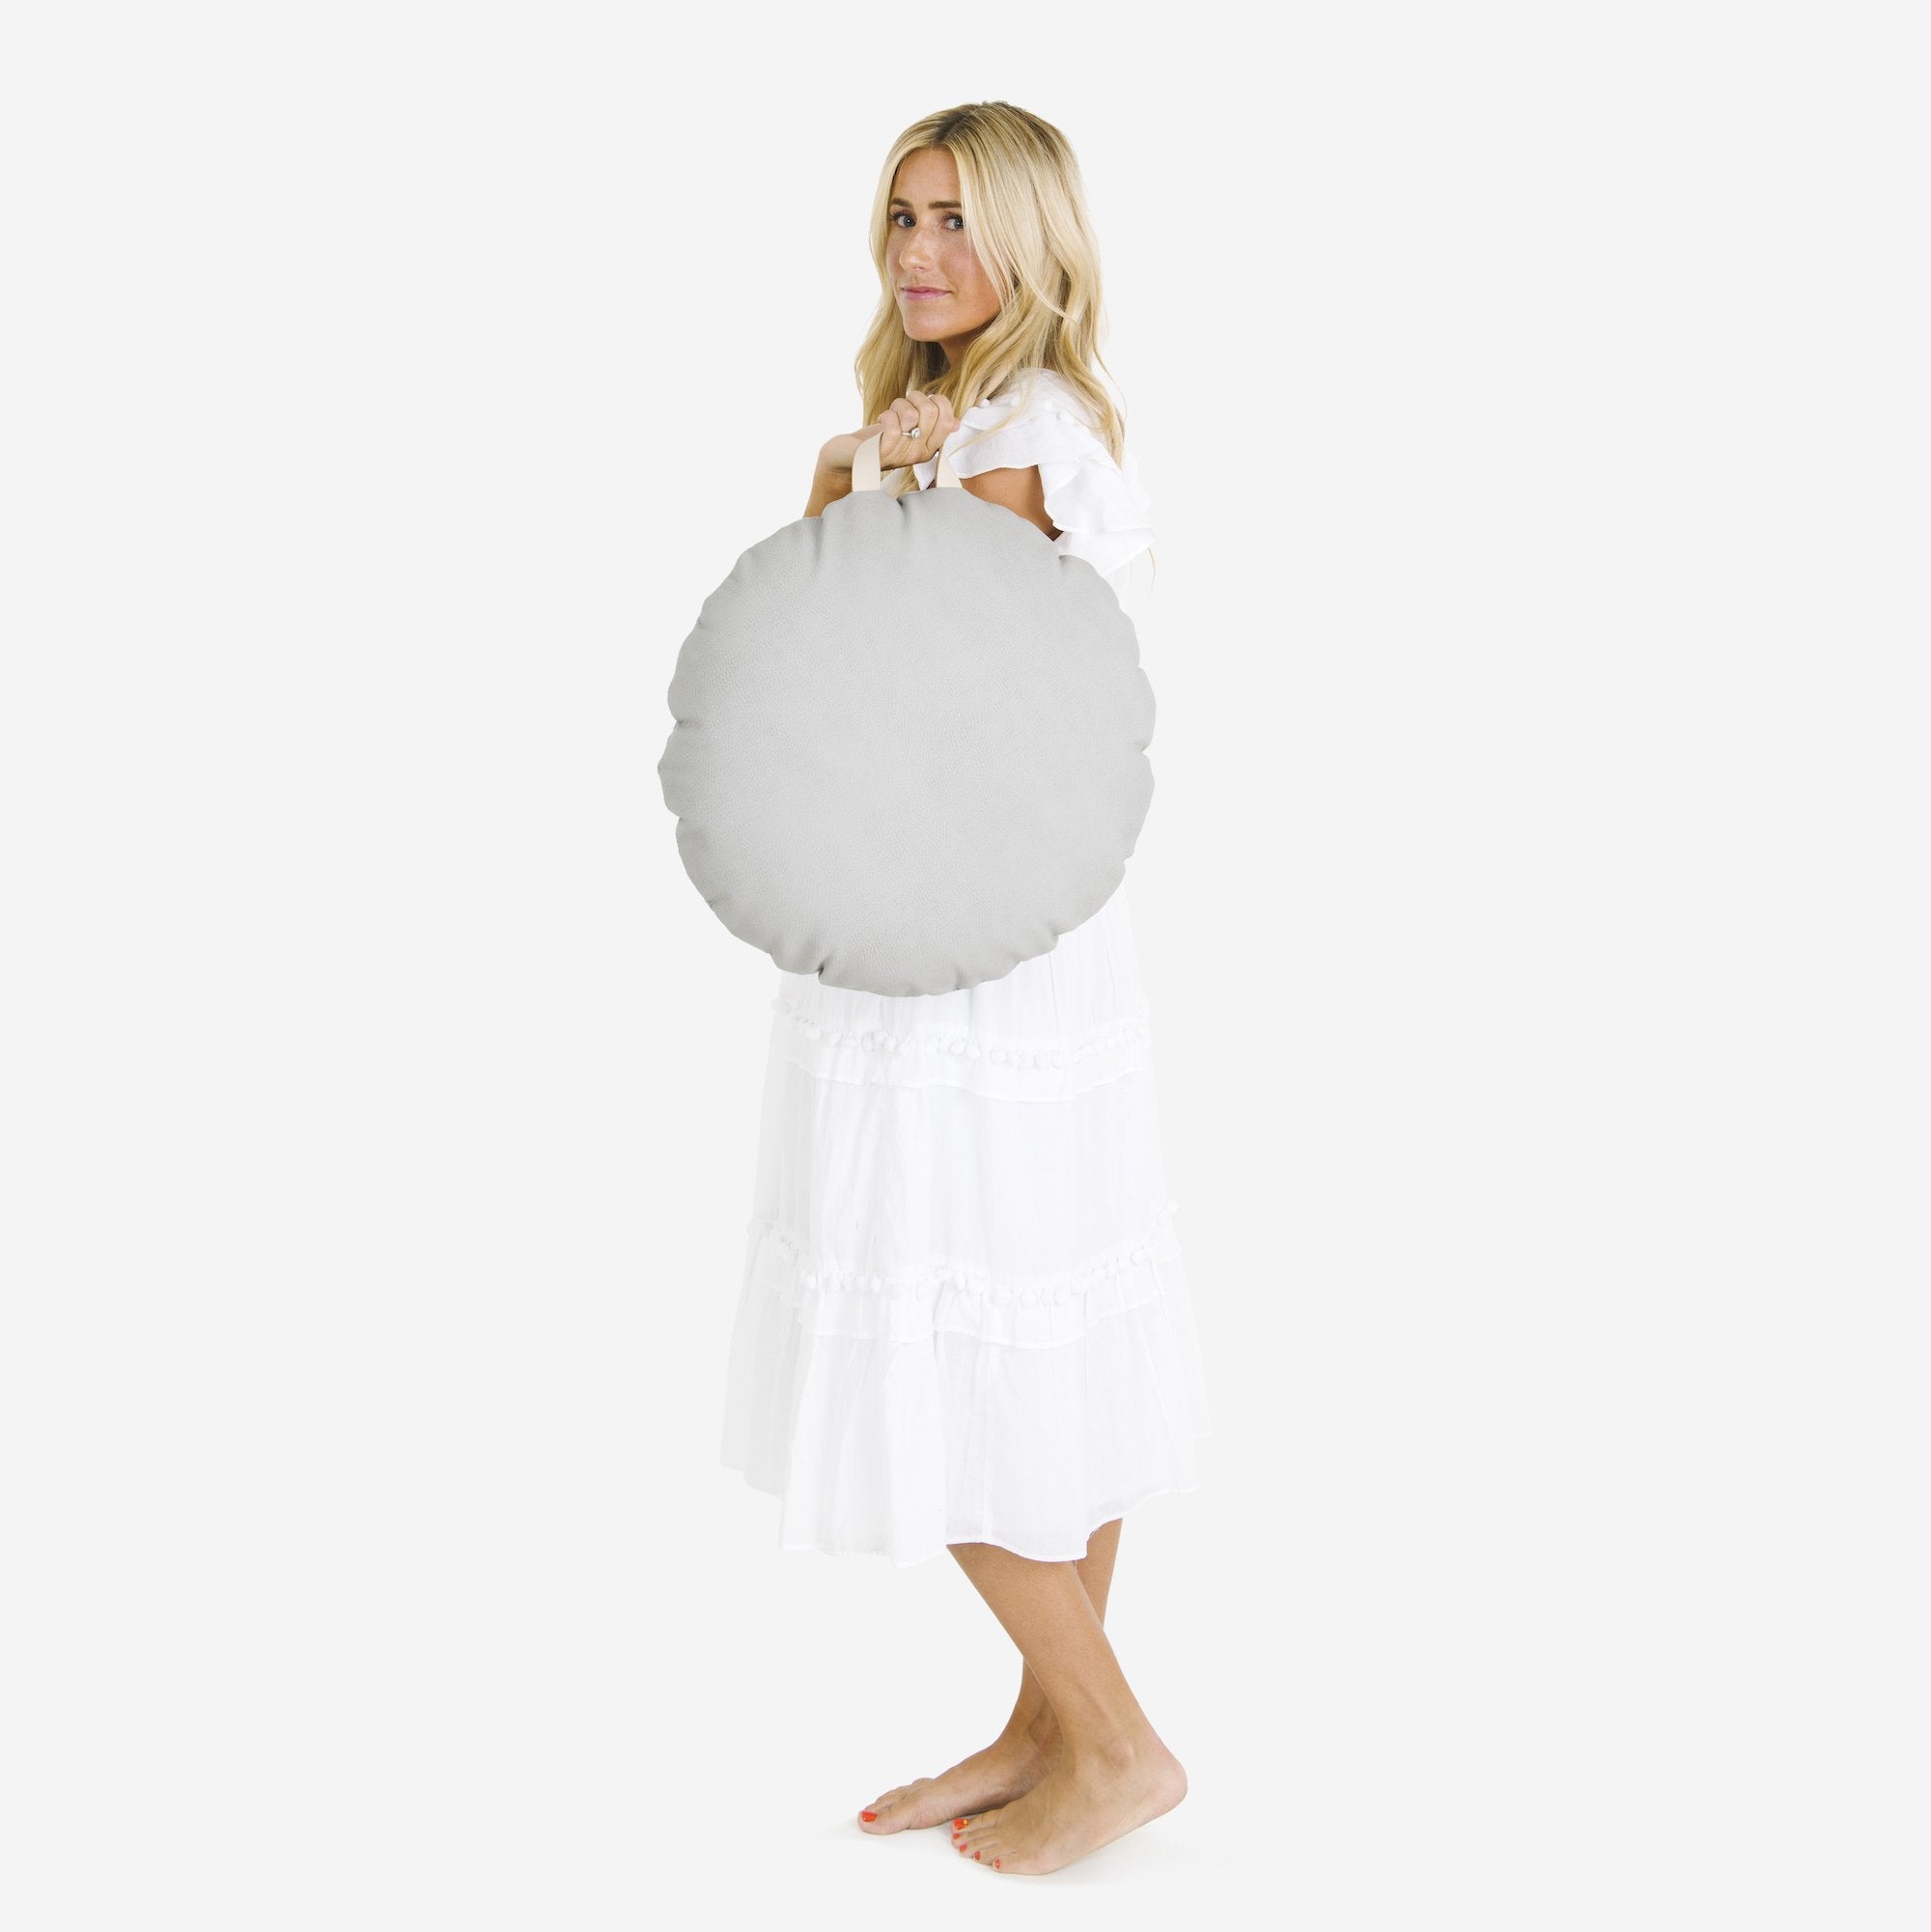 Pewter (on sale) / Circle@Woman holding the Pewter Circle Mini Floor Cushion